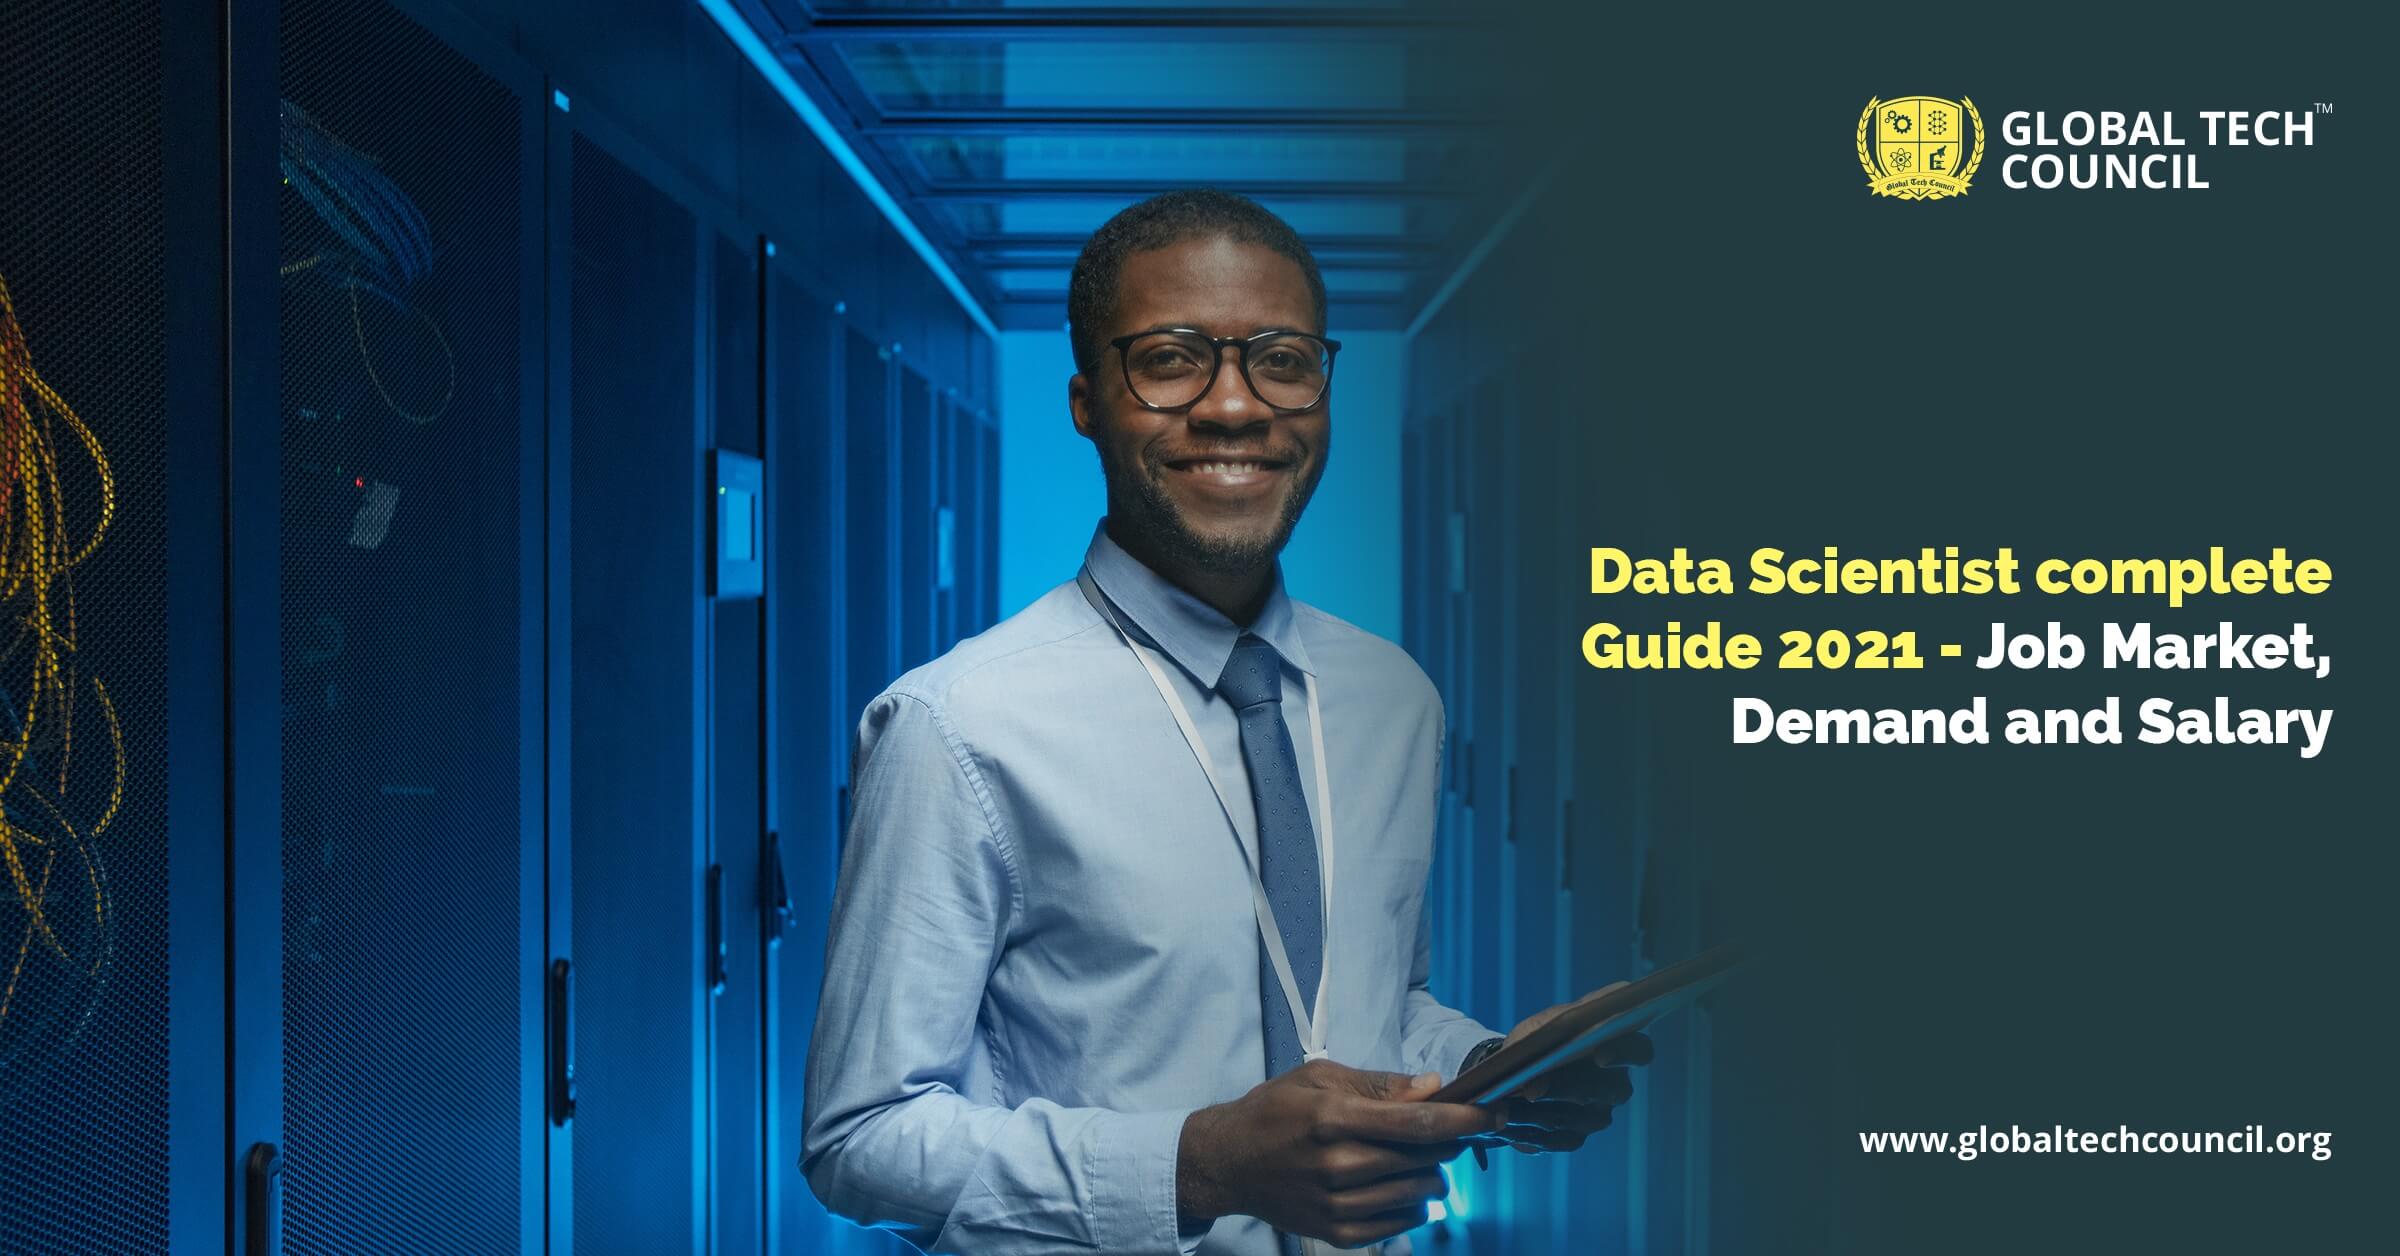 Data Scientist complete Guide 2021 - Job Market, Demand and Salary